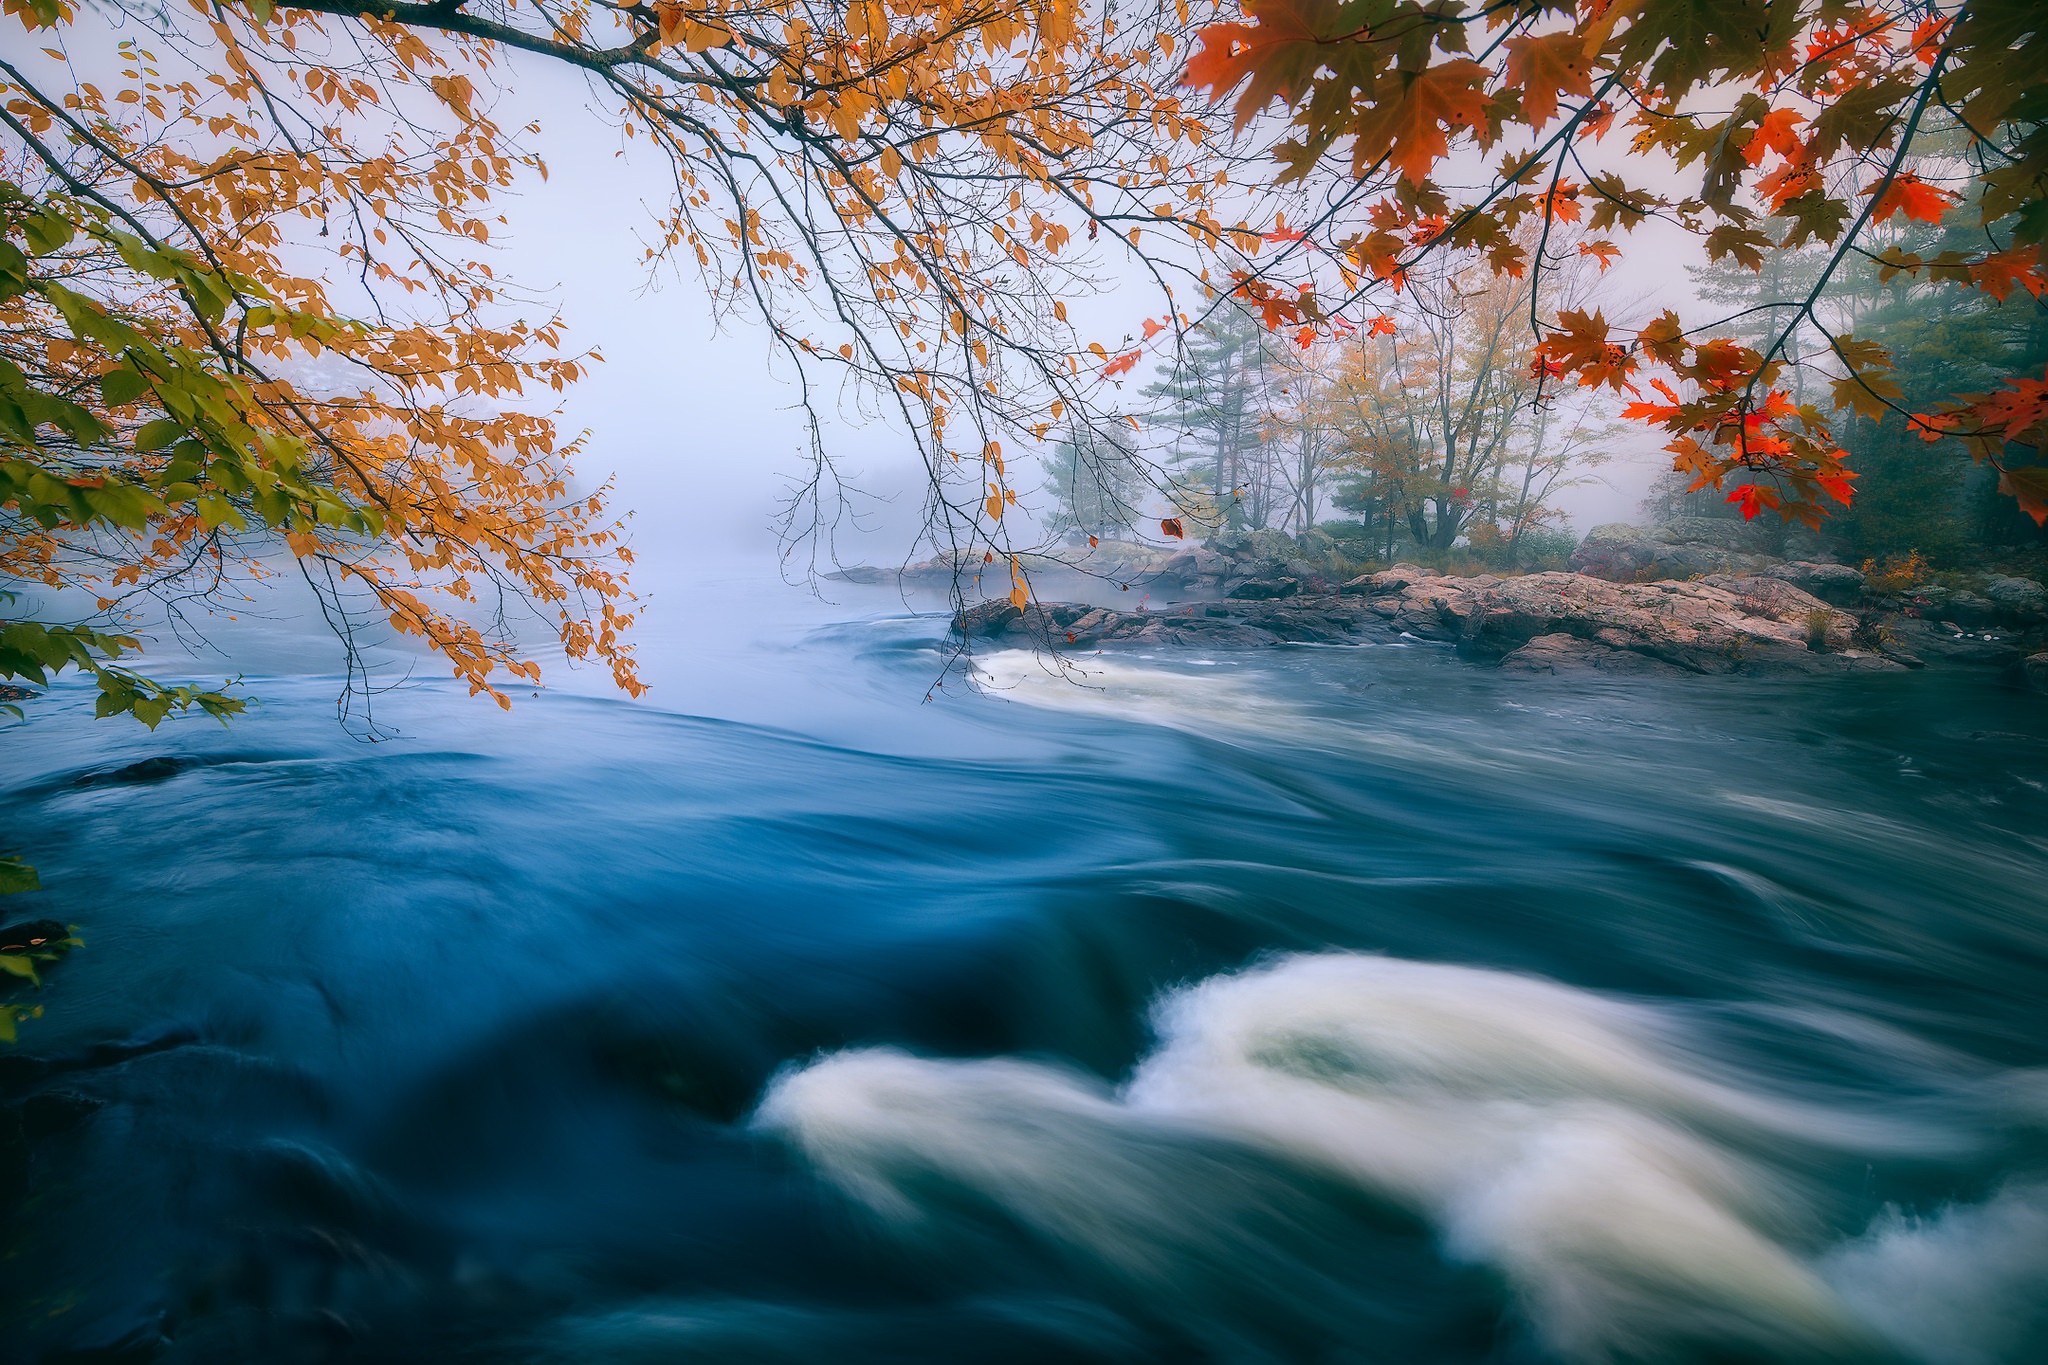 General 2048x1365 nature water river leaves outdoors fall long exposure